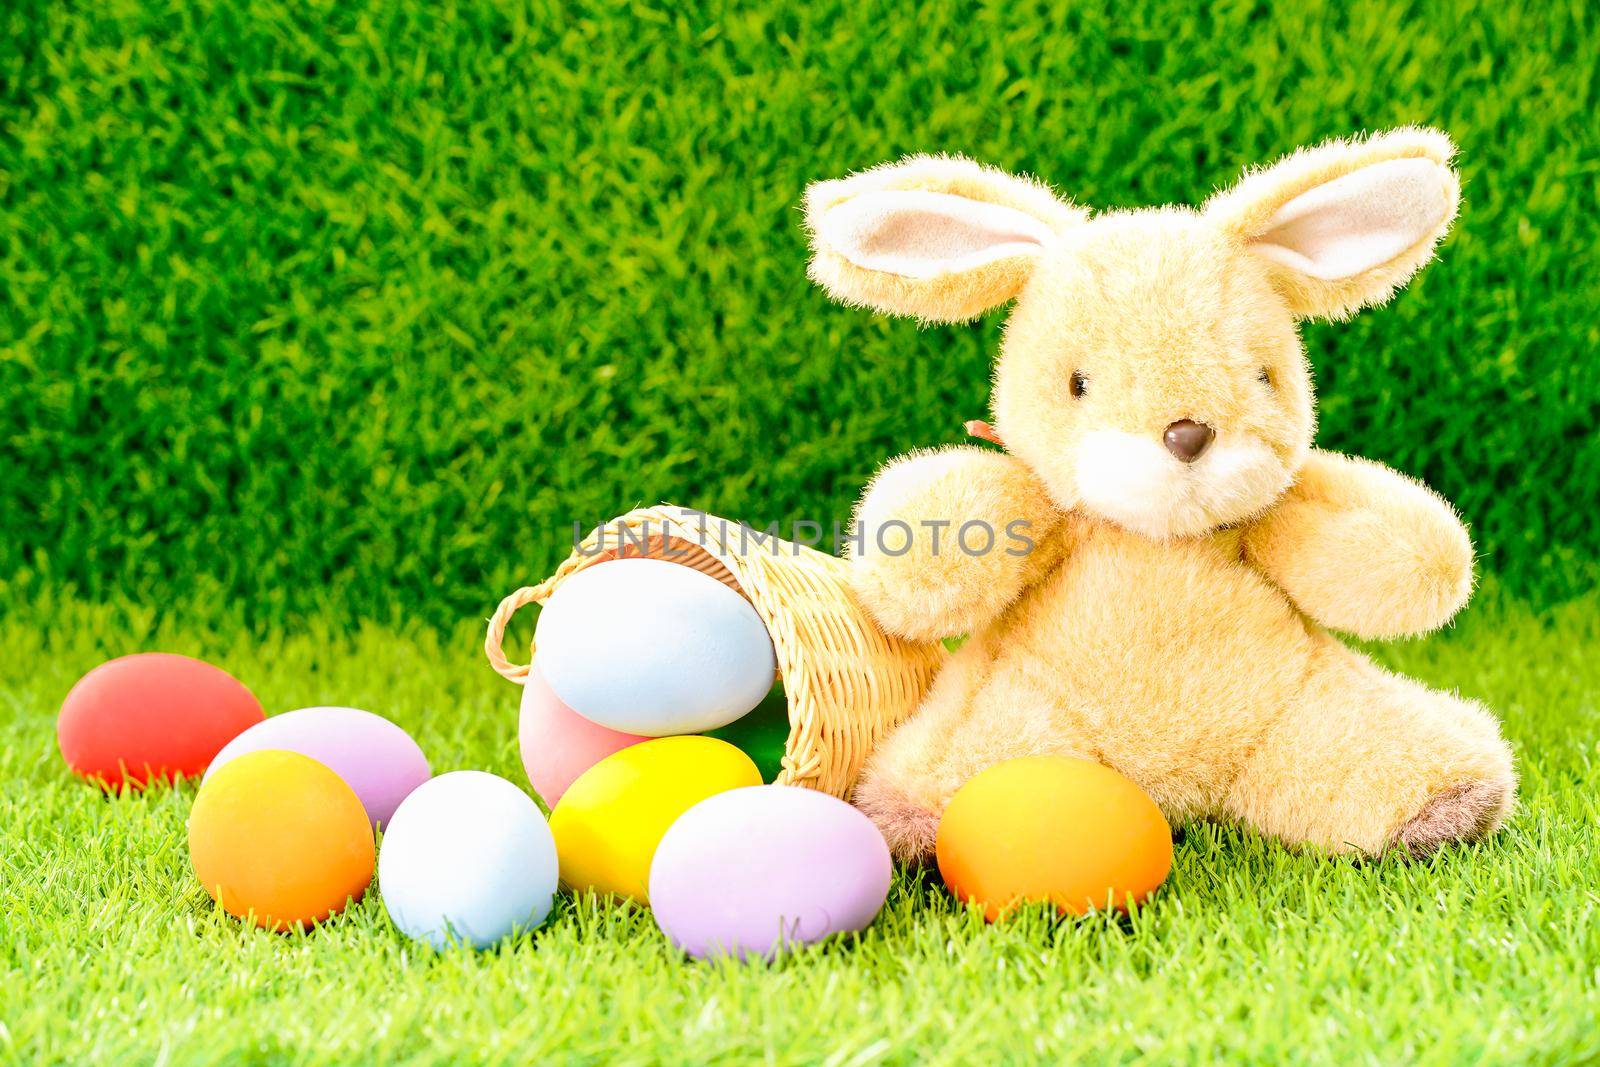 Easter bunny toy and Easter eggs in basket on green grass